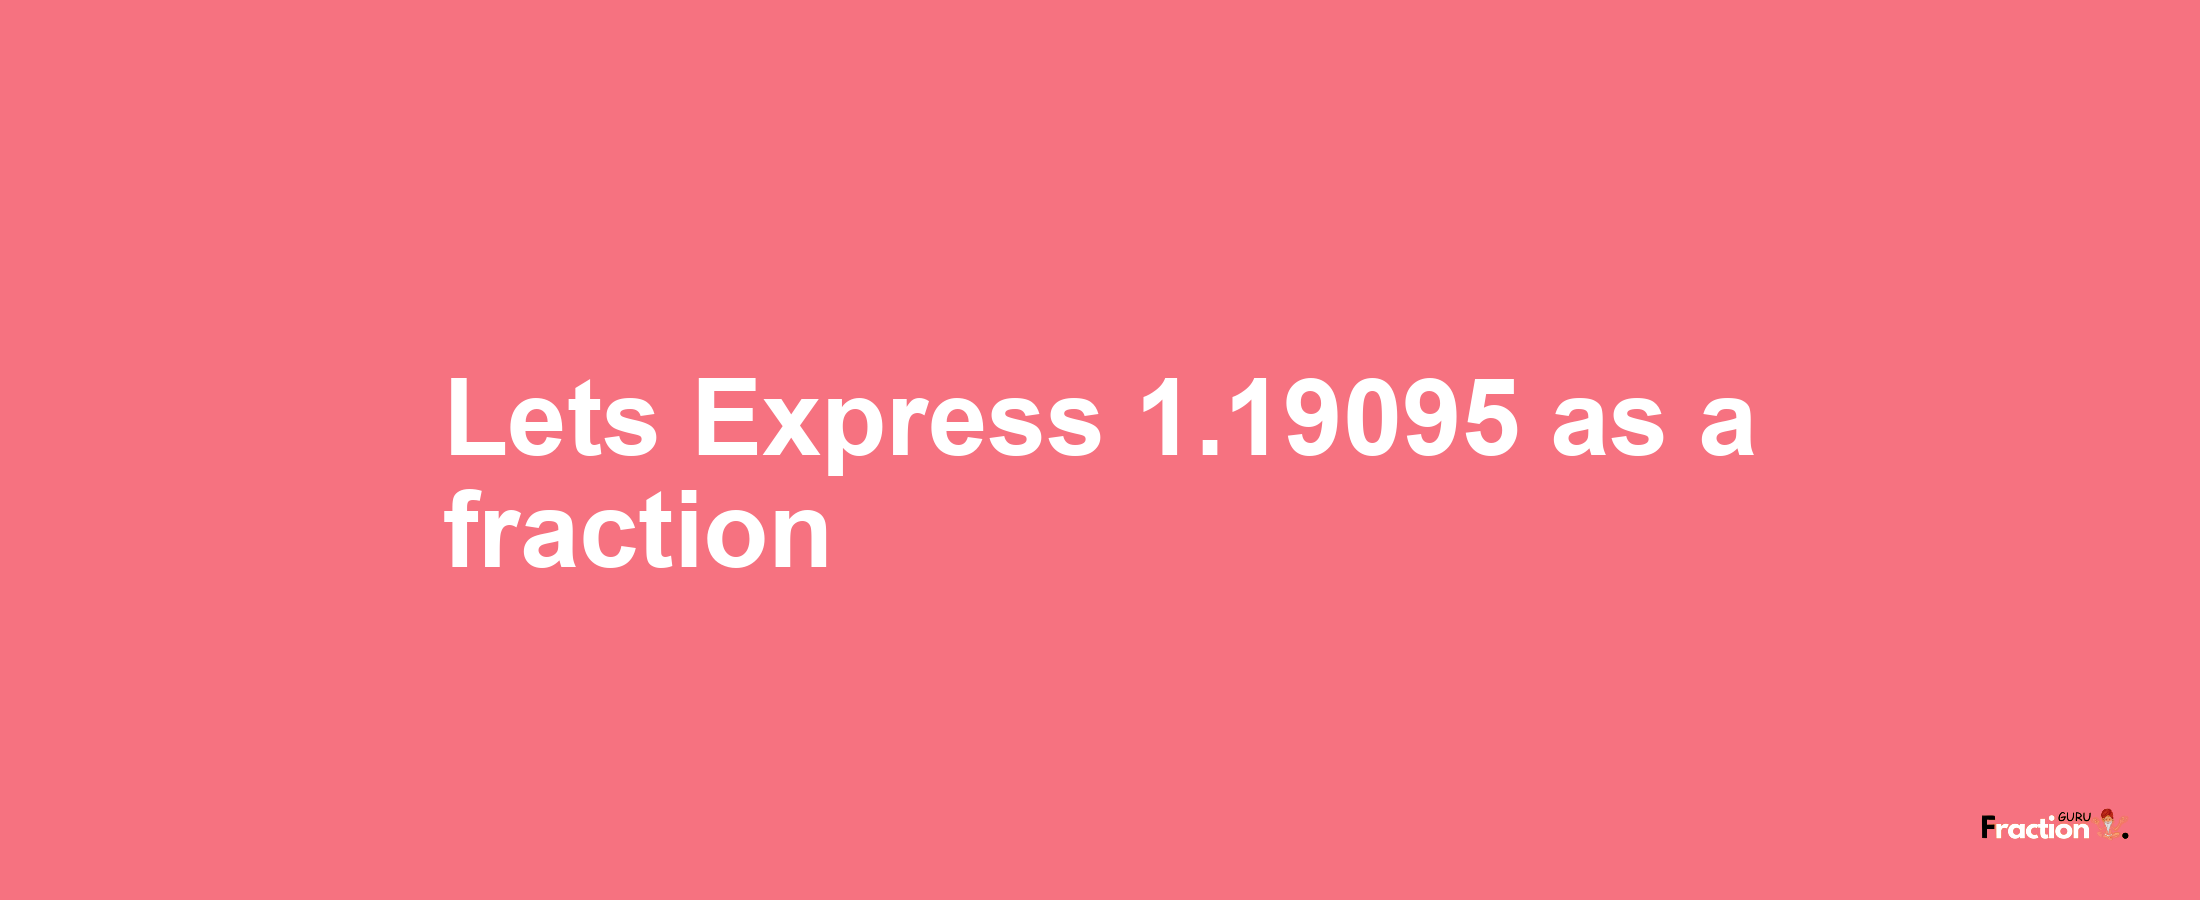 Lets Express 1.19095 as afraction